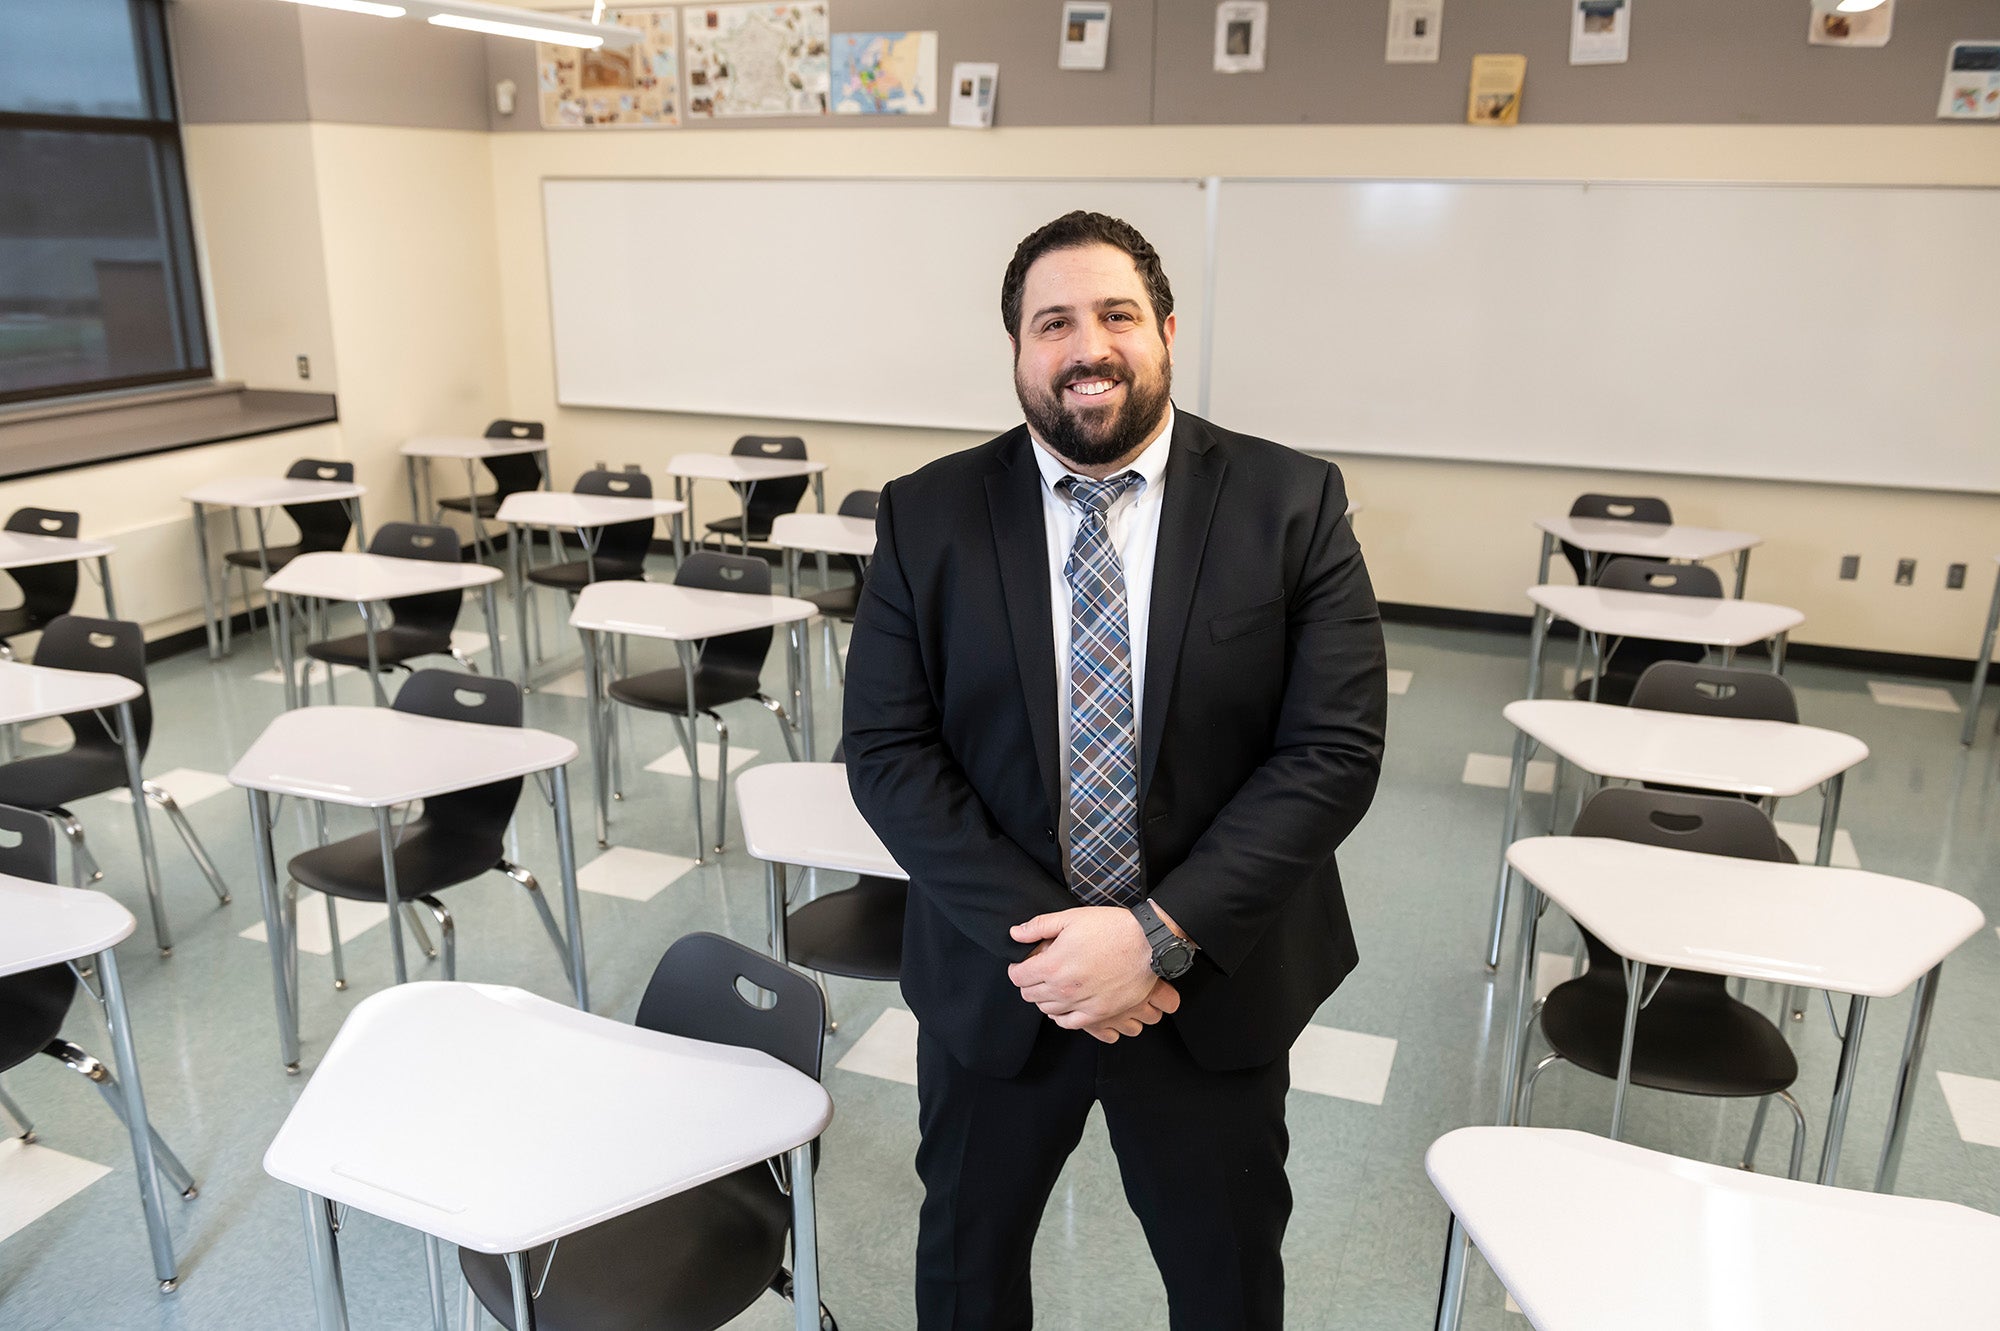 Villani stands in a suit in an empty classroom